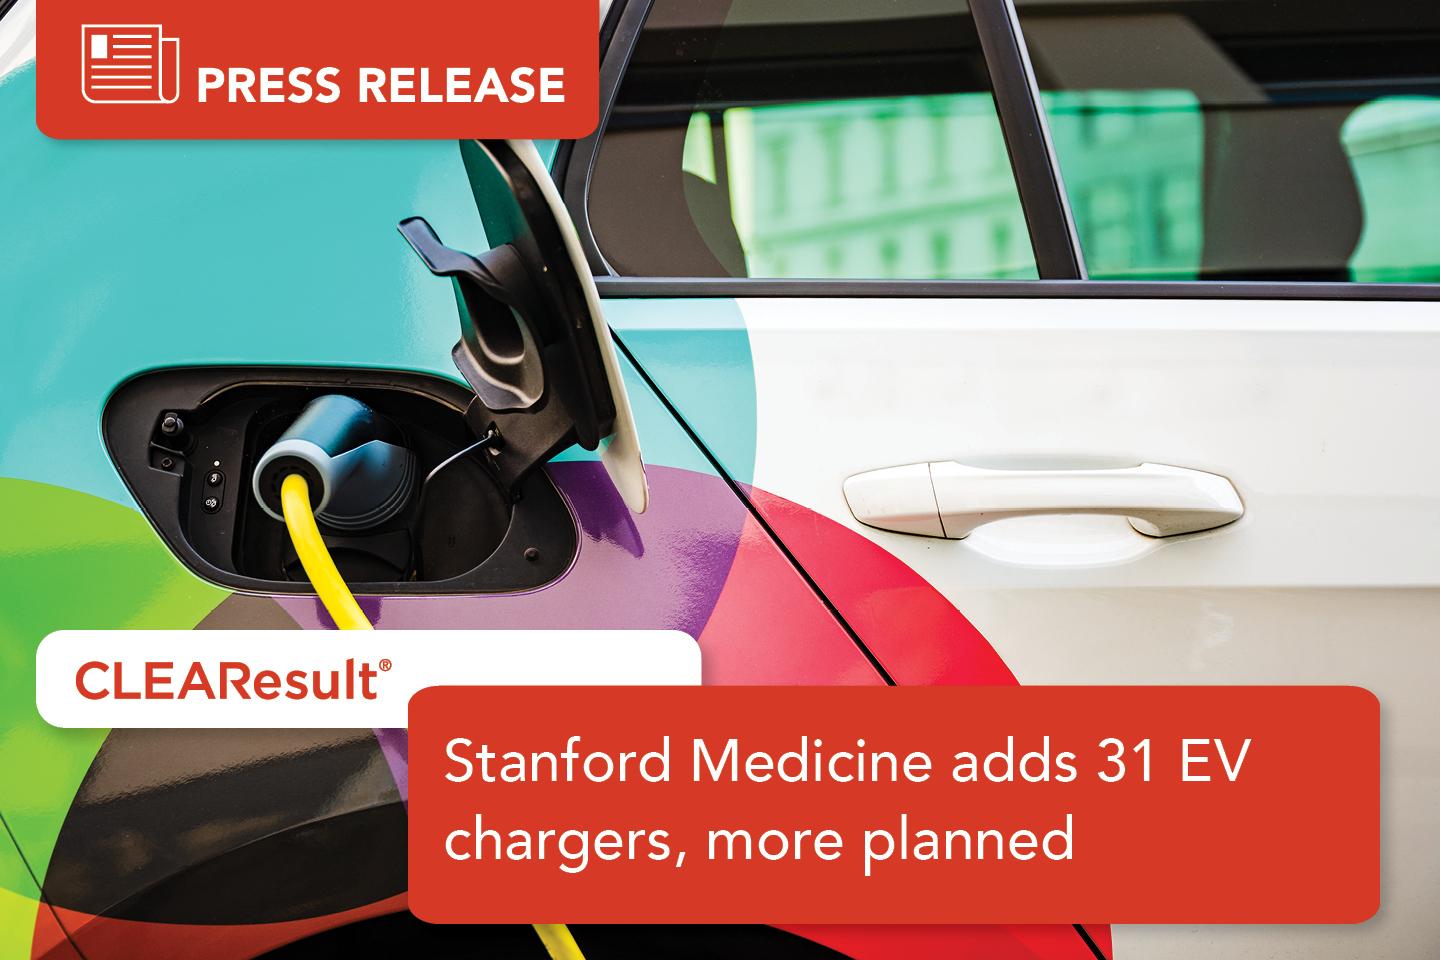 Stanford Medicine adds 31 EV chargers, more planned